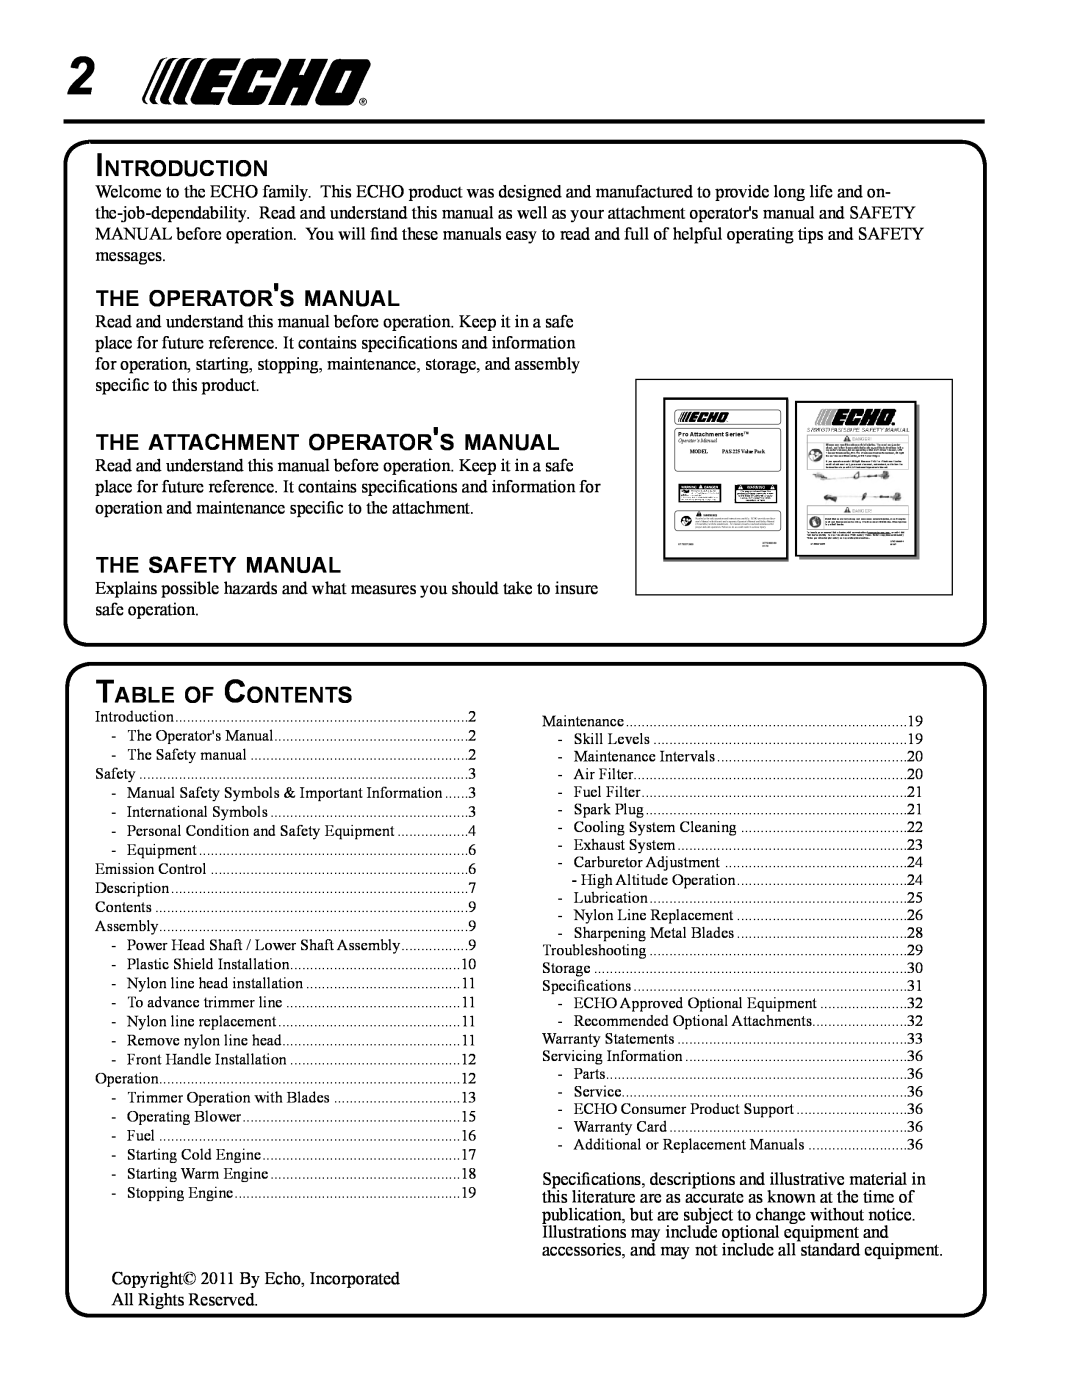 Echo PAS-225 Introduction, the operators manual, the attachment operators manual, the safety manual, Table of Contents 